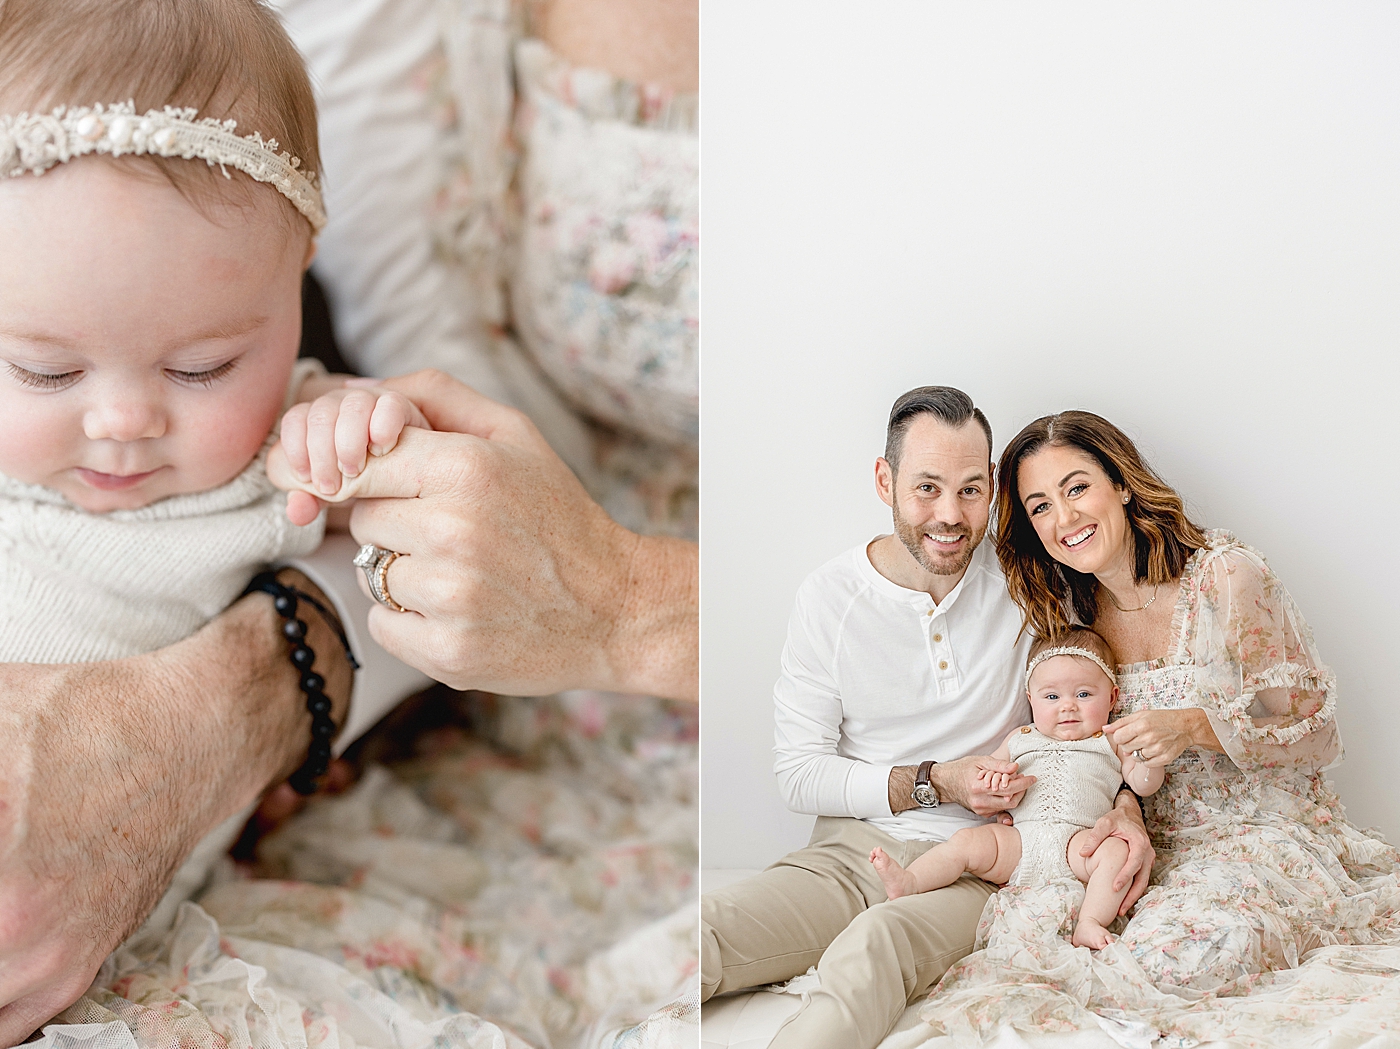 Family portraits of parents and baby girl during six month milestone session. Photo by Brittany Elise Photography.